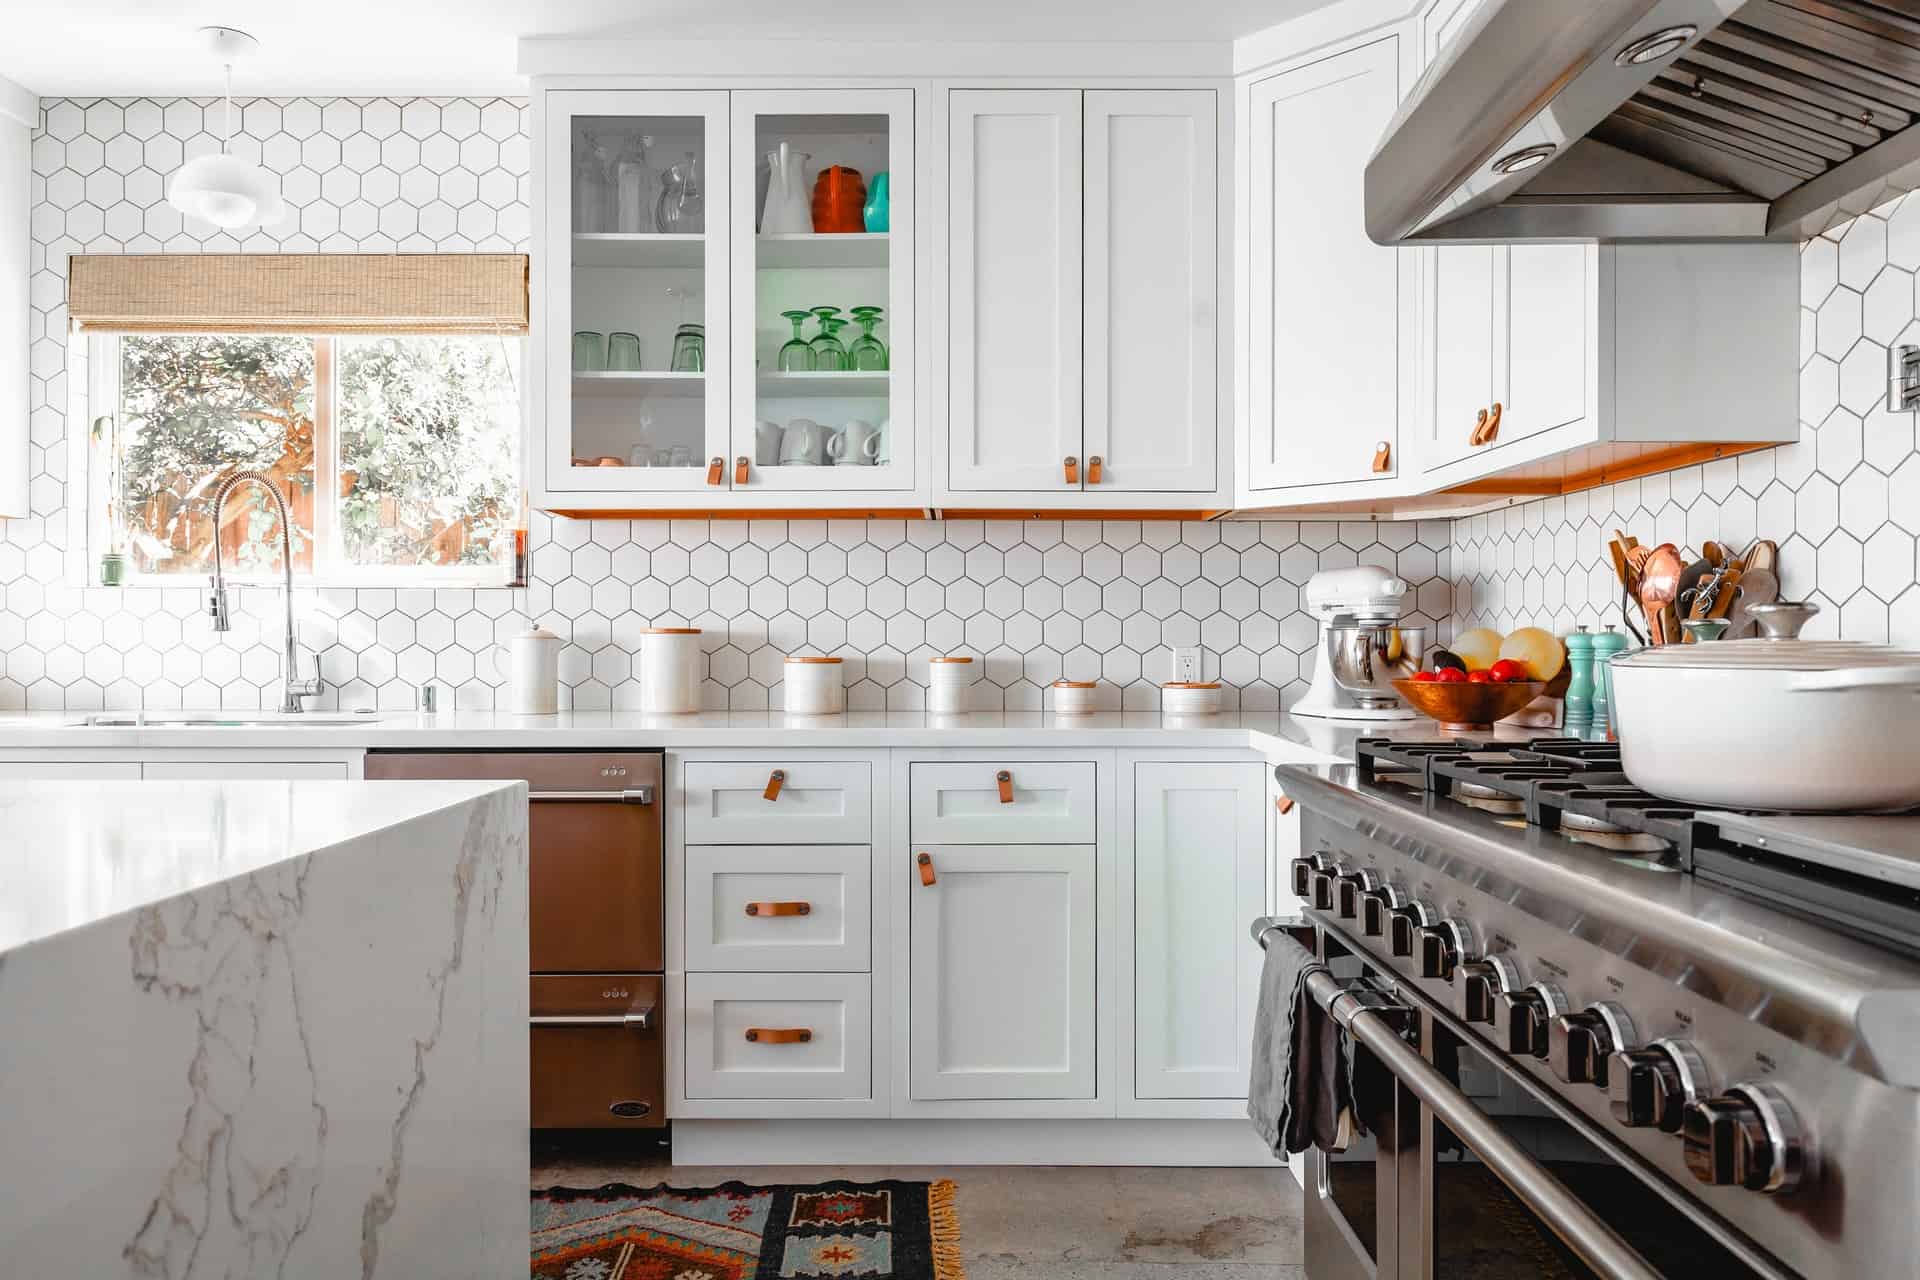 Replacing fronts in kitchen cabinets – how to do it?